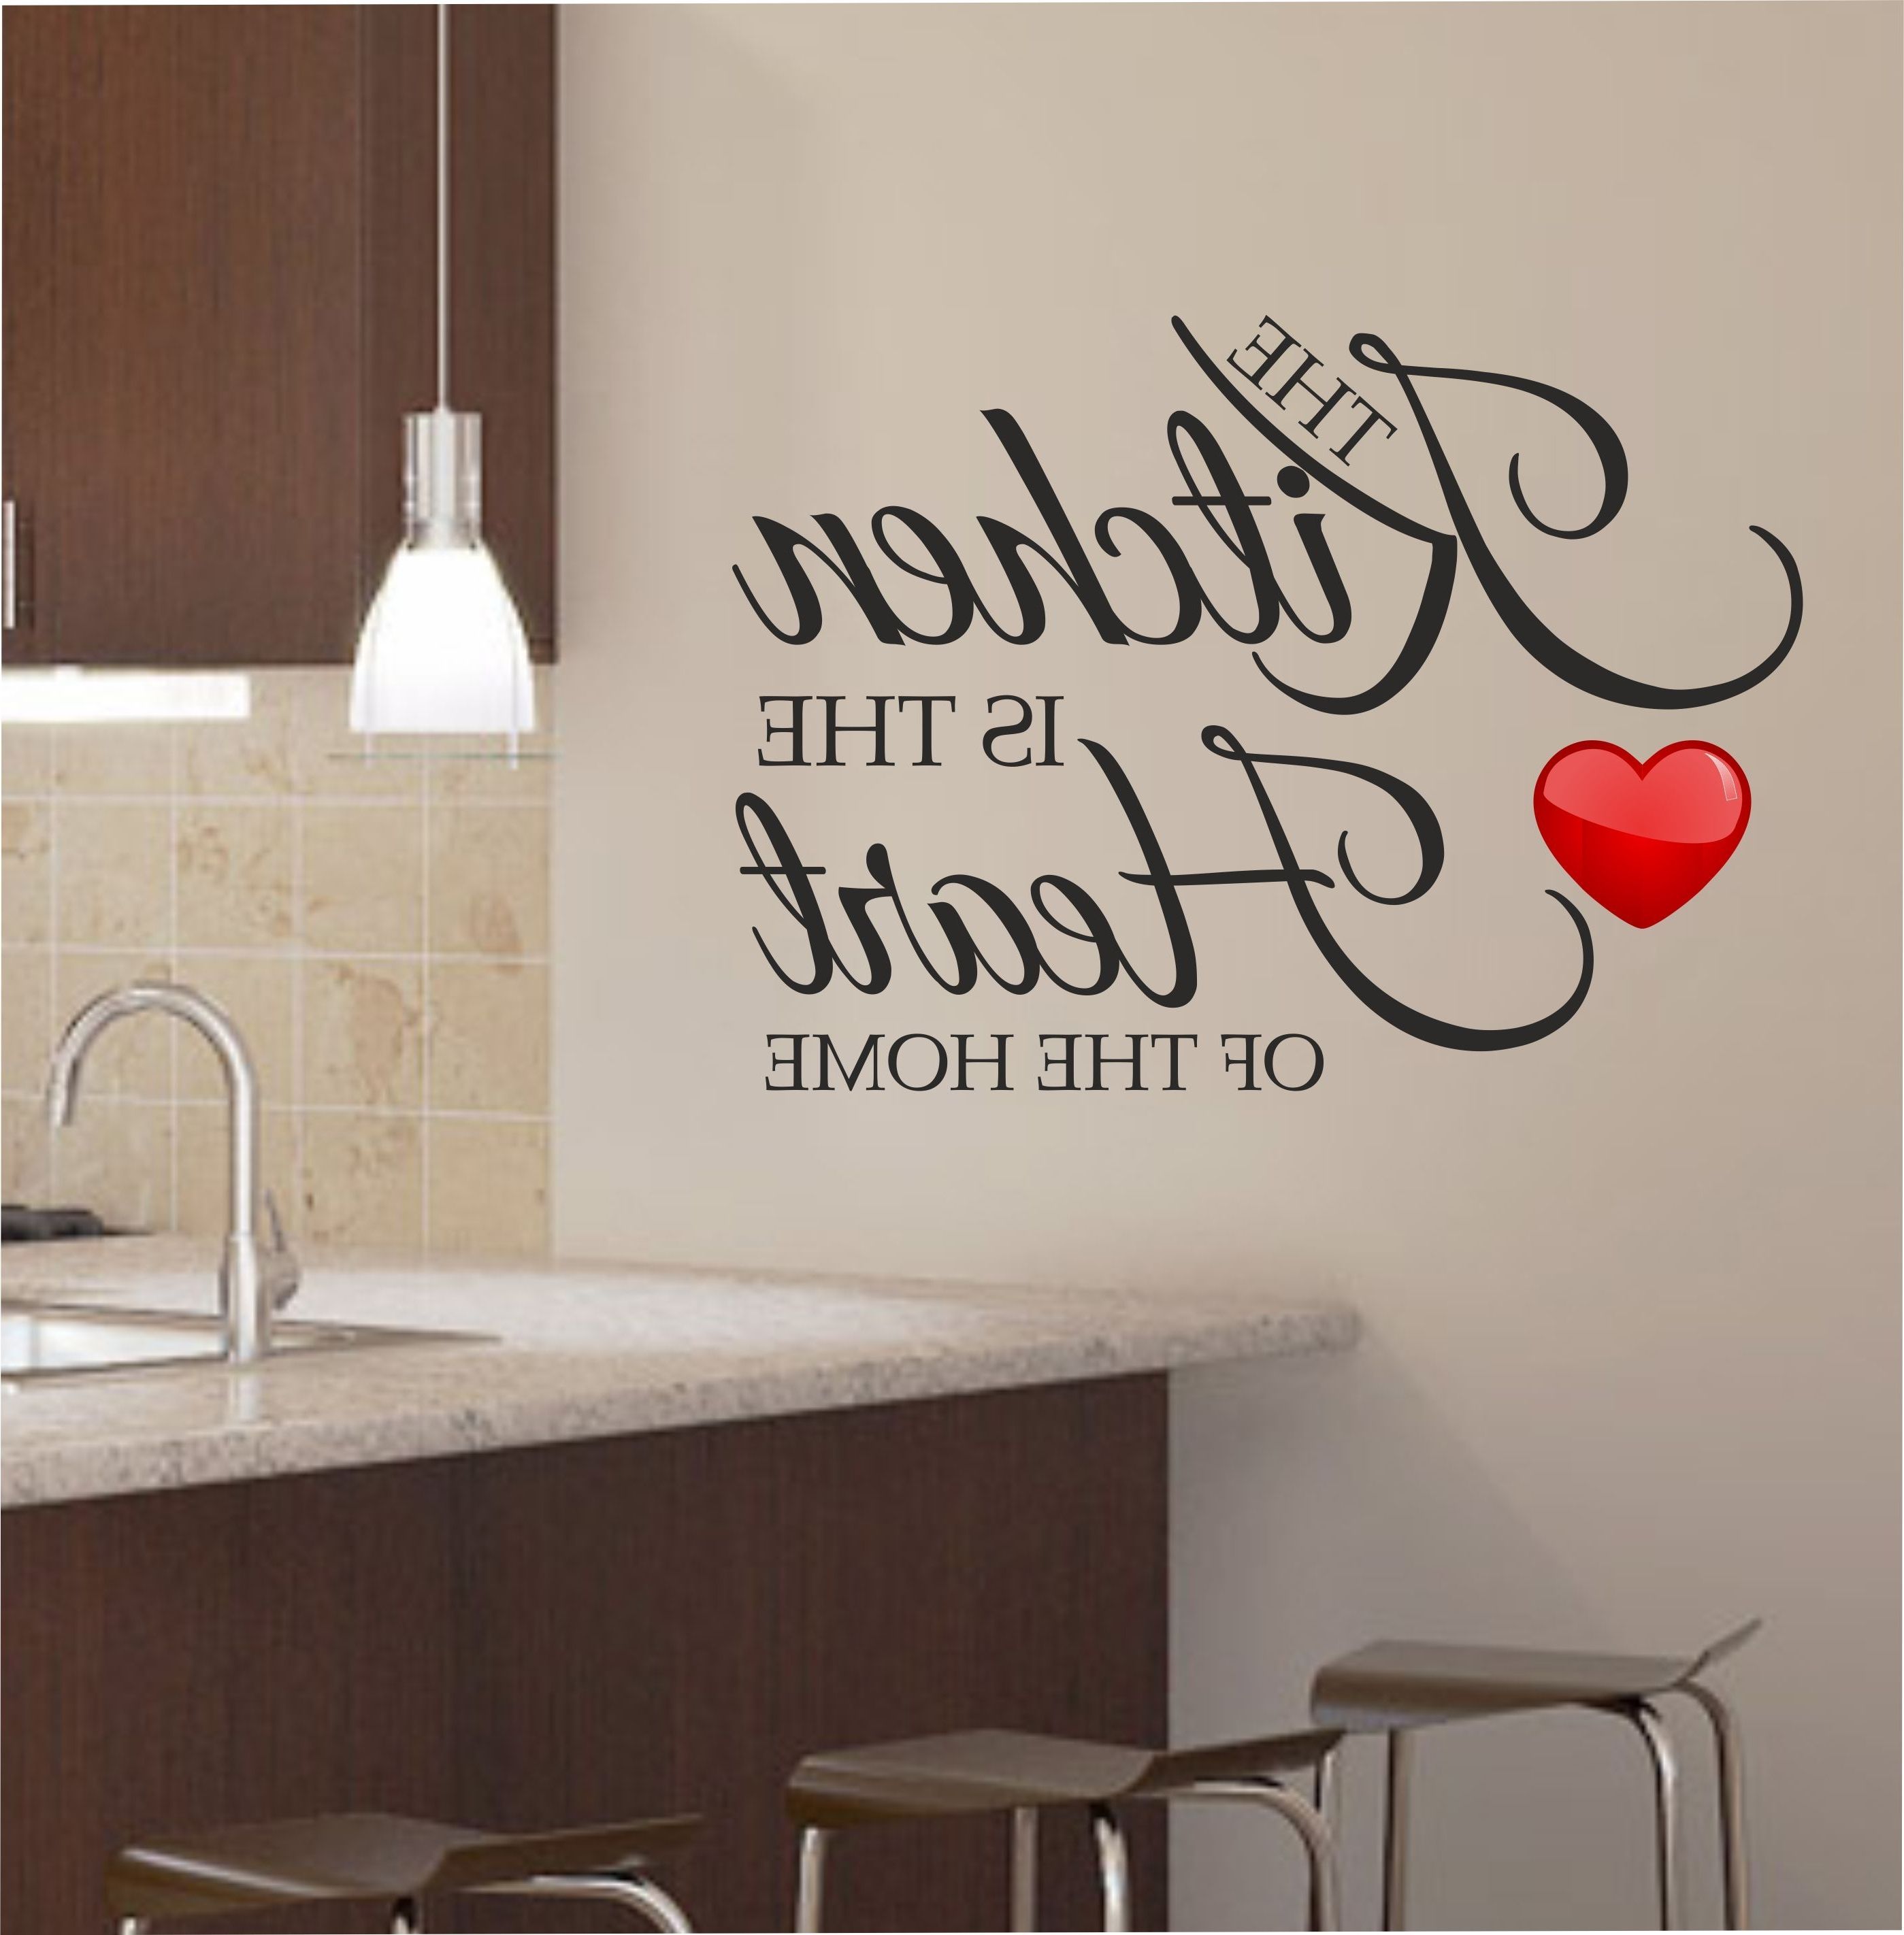 [%kitchen Wall Stickers Decor – [peenmedia] Pertaining To 2018 Cucina Wall Art|cucina Wall Art In Newest Kitchen Wall Stickers Decor – [peenmedia]|recent Cucina Wall Art Intended For Kitchen Wall Stickers Decor – [peenmedia]|well Known Kitchen Wall Stickers Decor – [peenmedia] Intended For Cucina Wall Art%] (View 13 of 15)